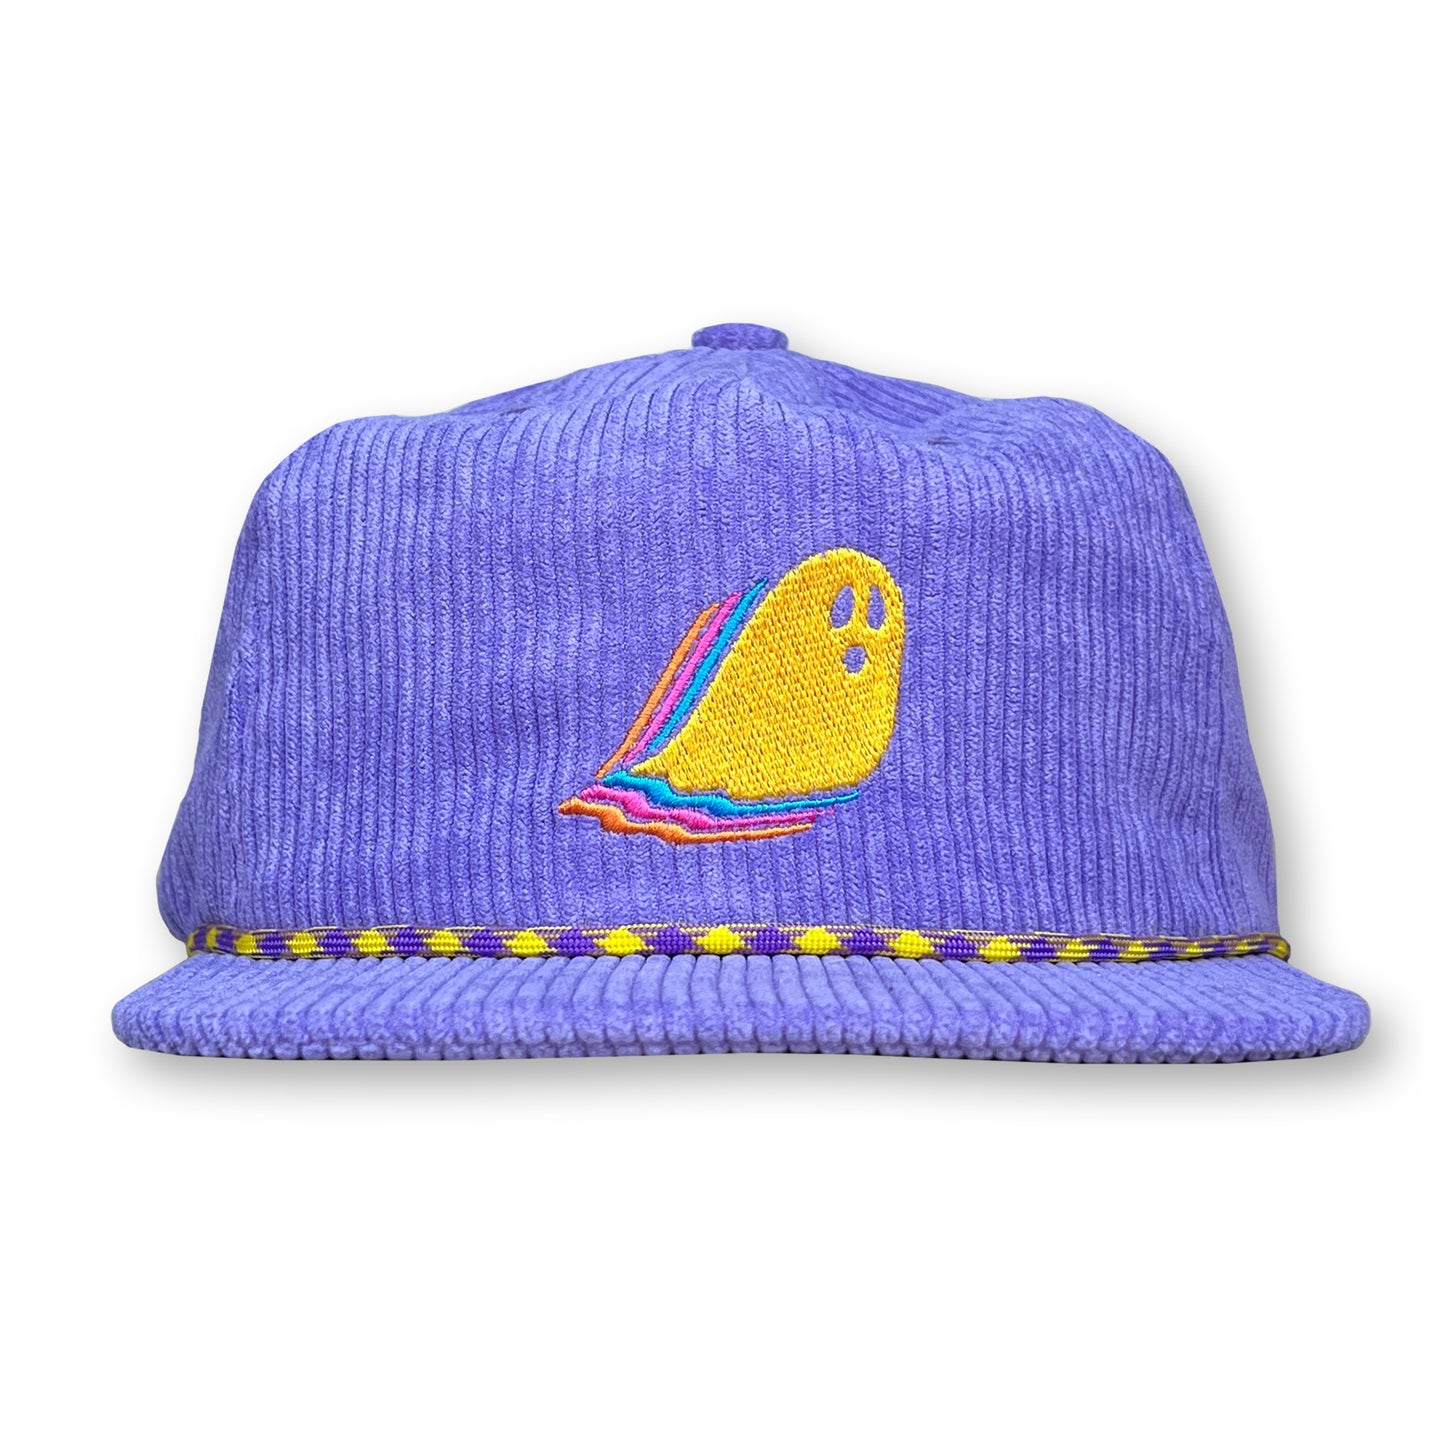 Ghost Rope Hat / Wisteria Corduroy with Egg Yolk Ghost